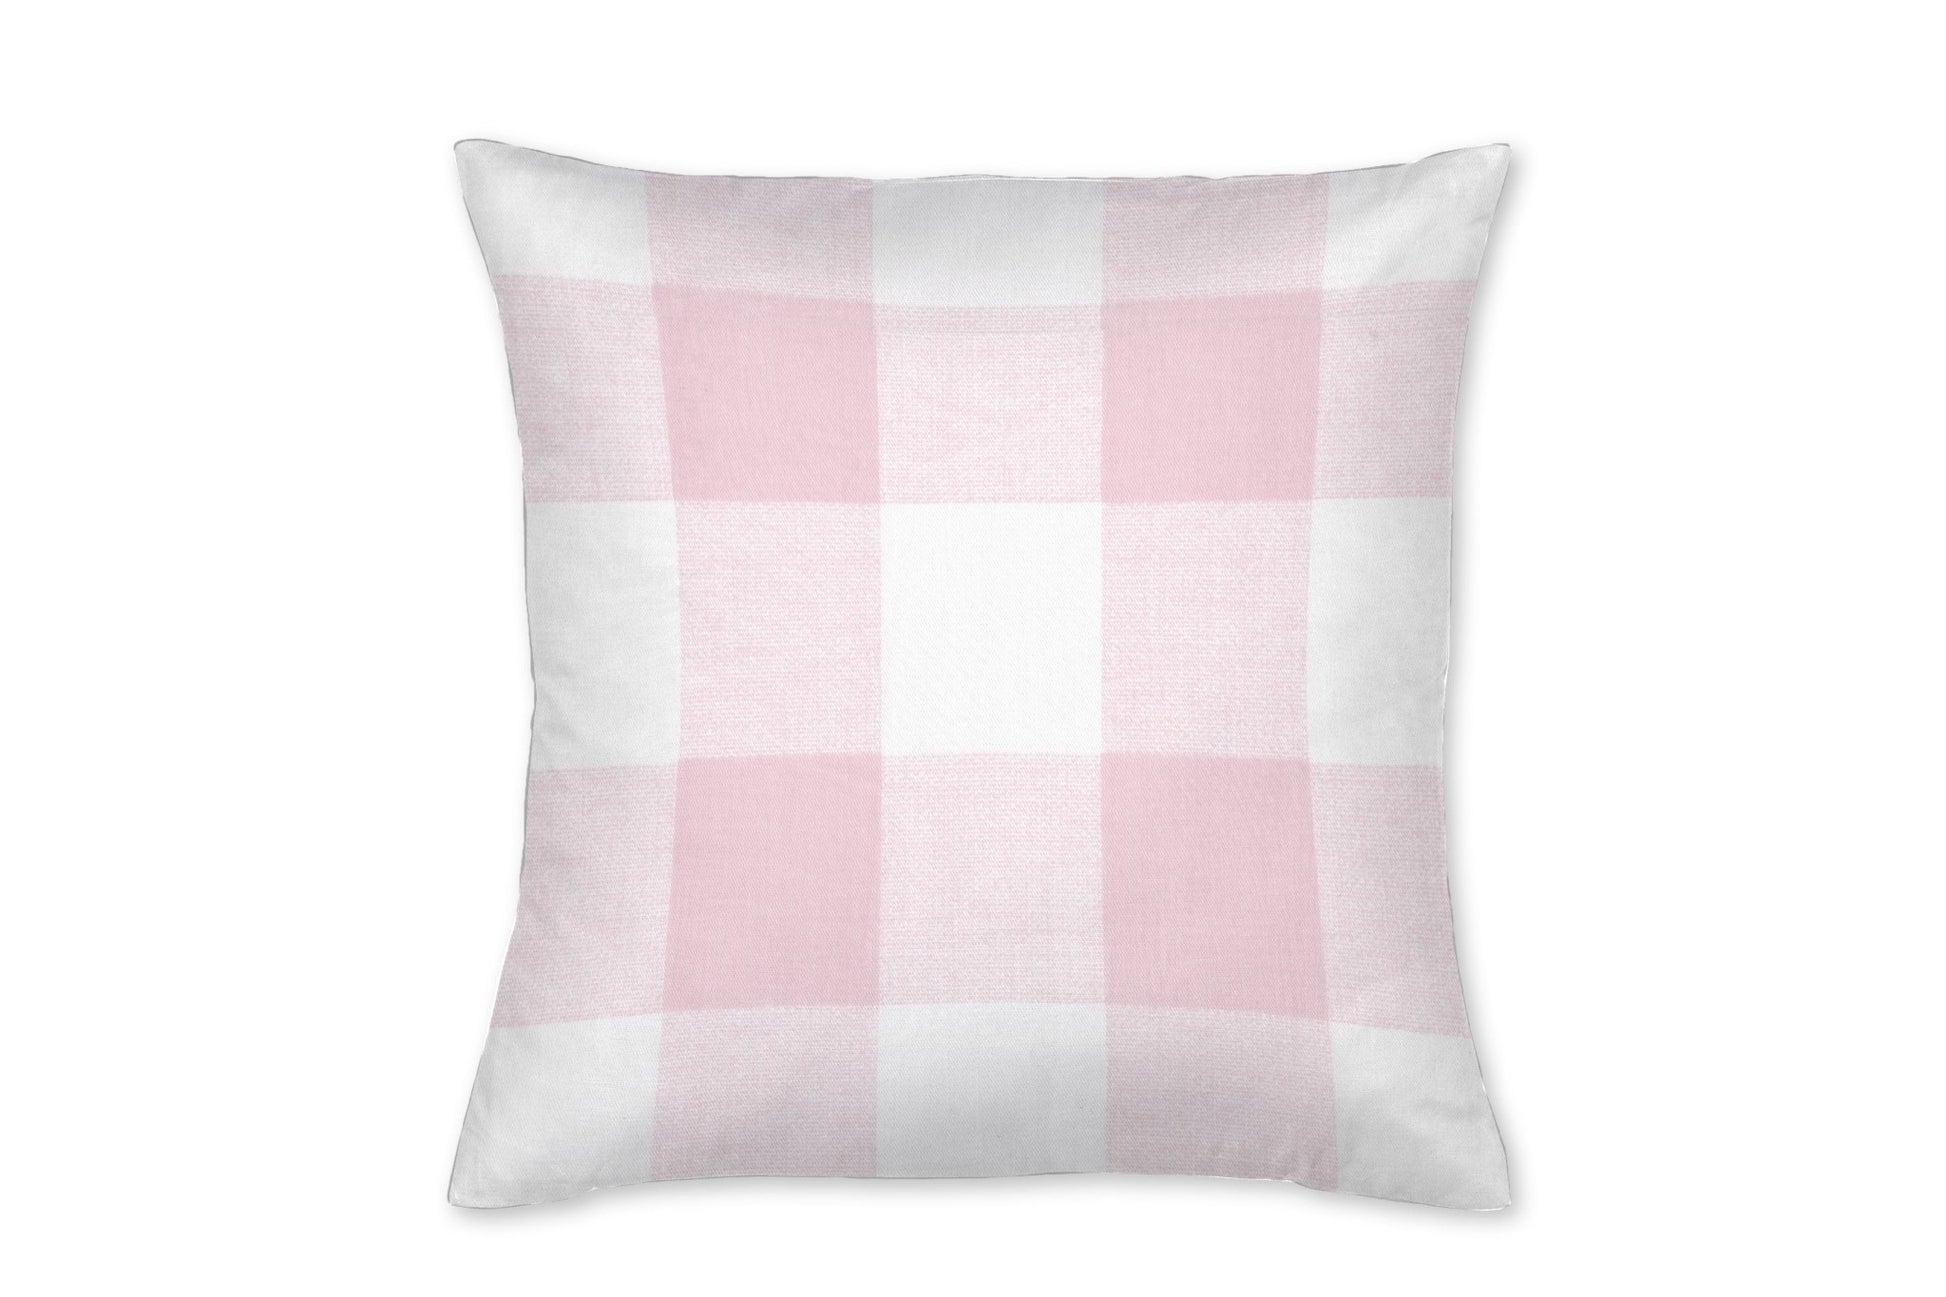 Floral and Pink Buffalo Plaid Throw Pillow - New Arrivals Inc